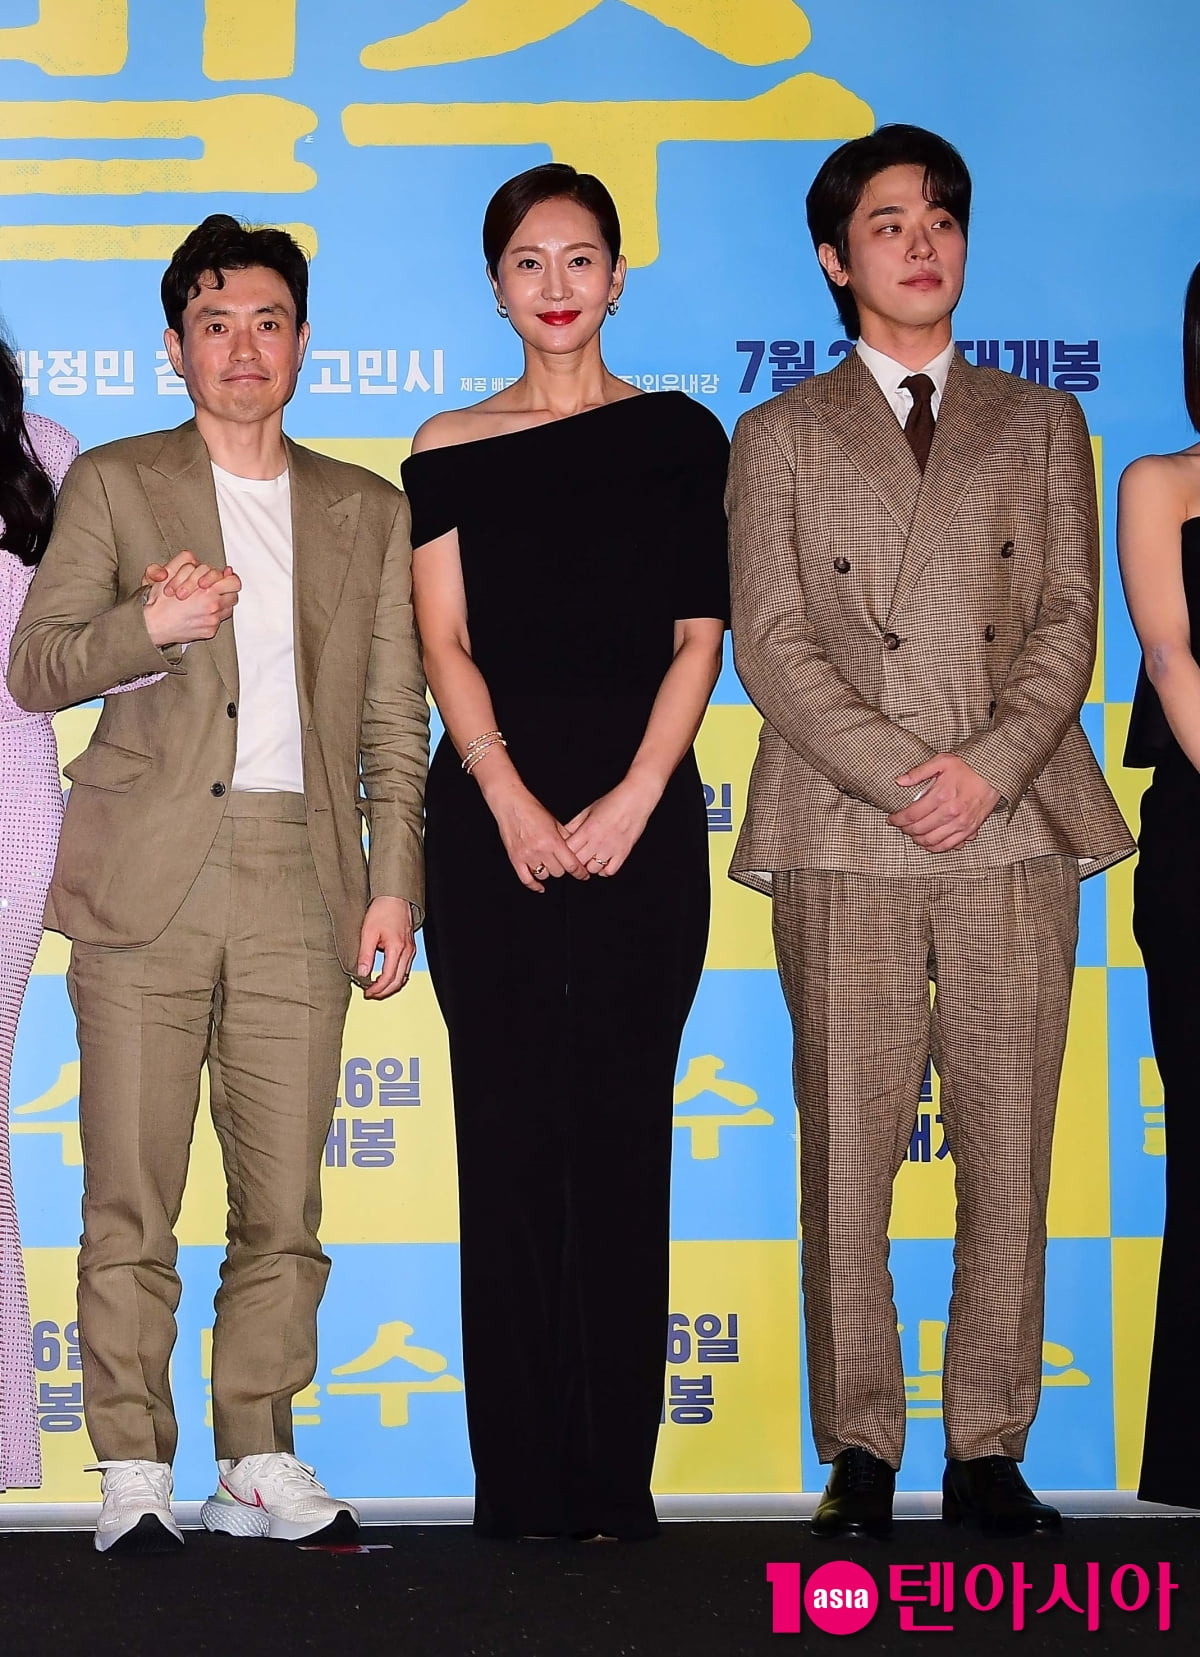 Yum Jeong-ah, Park Jung-min, and Director Ryoo Seung-wan confirmed to attend the Toronto International Film Festival